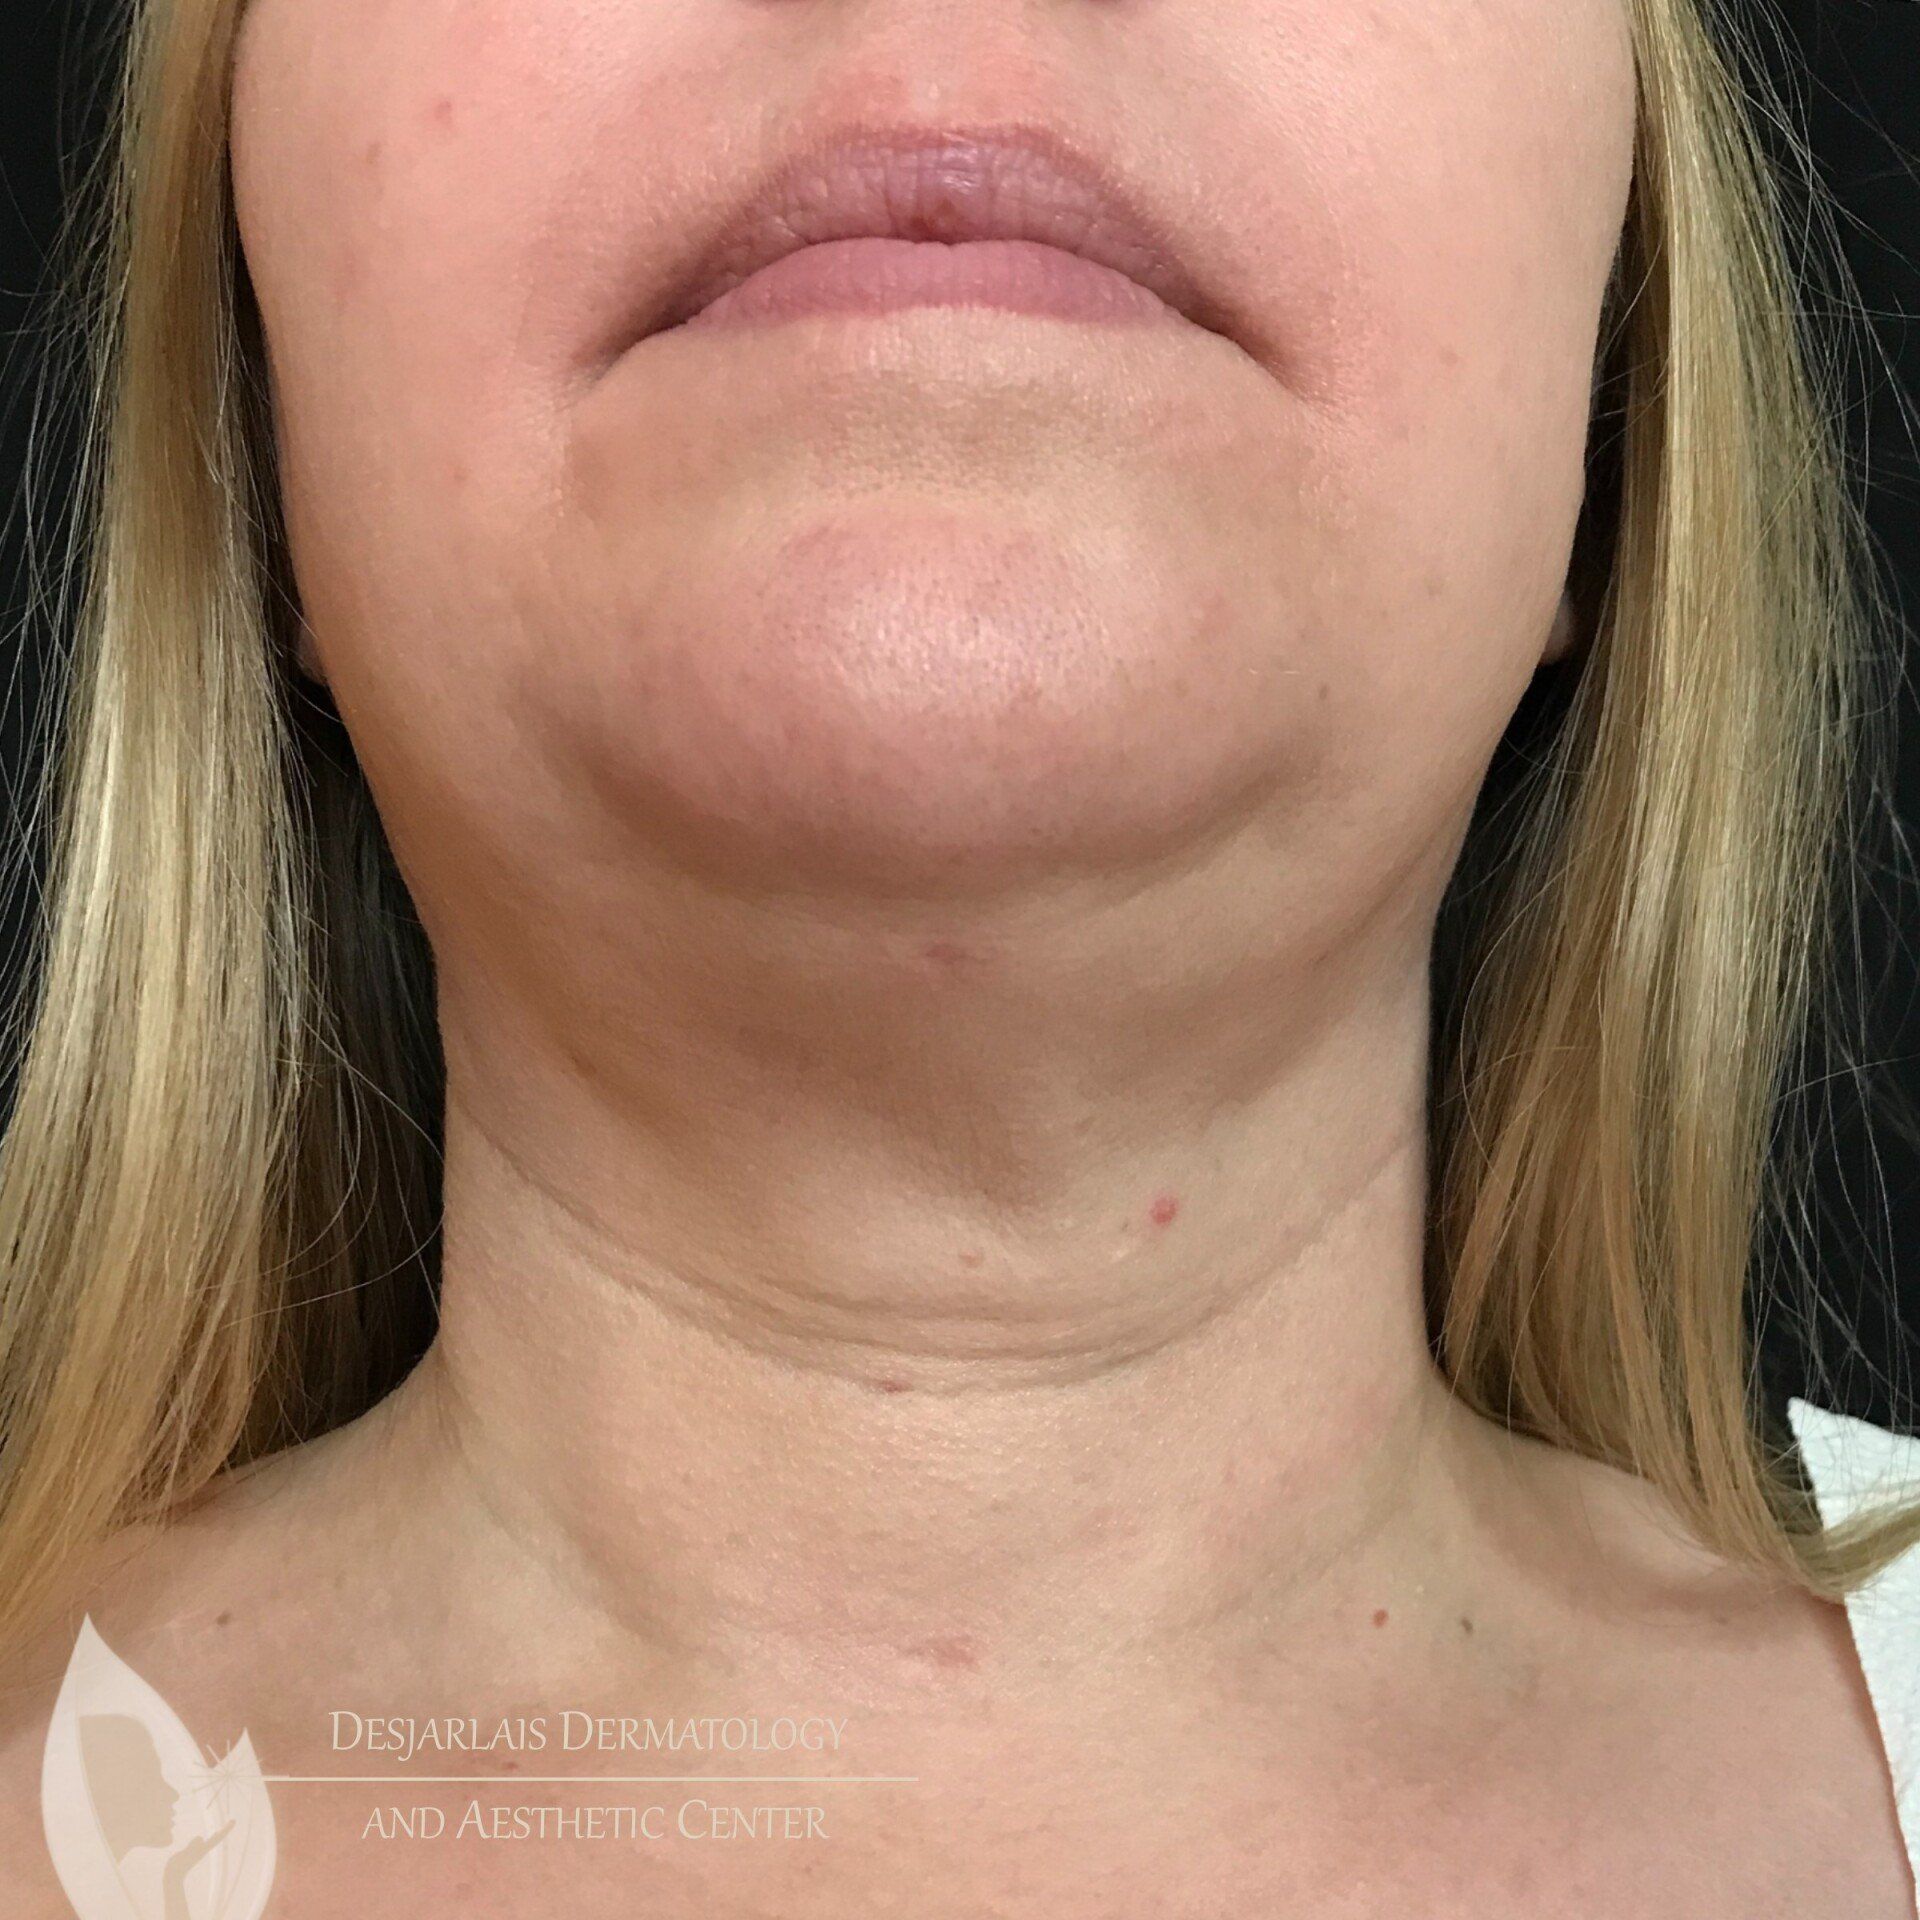 FaceTite After Image at Dr. Desjarlais' Office in Adrian, MI